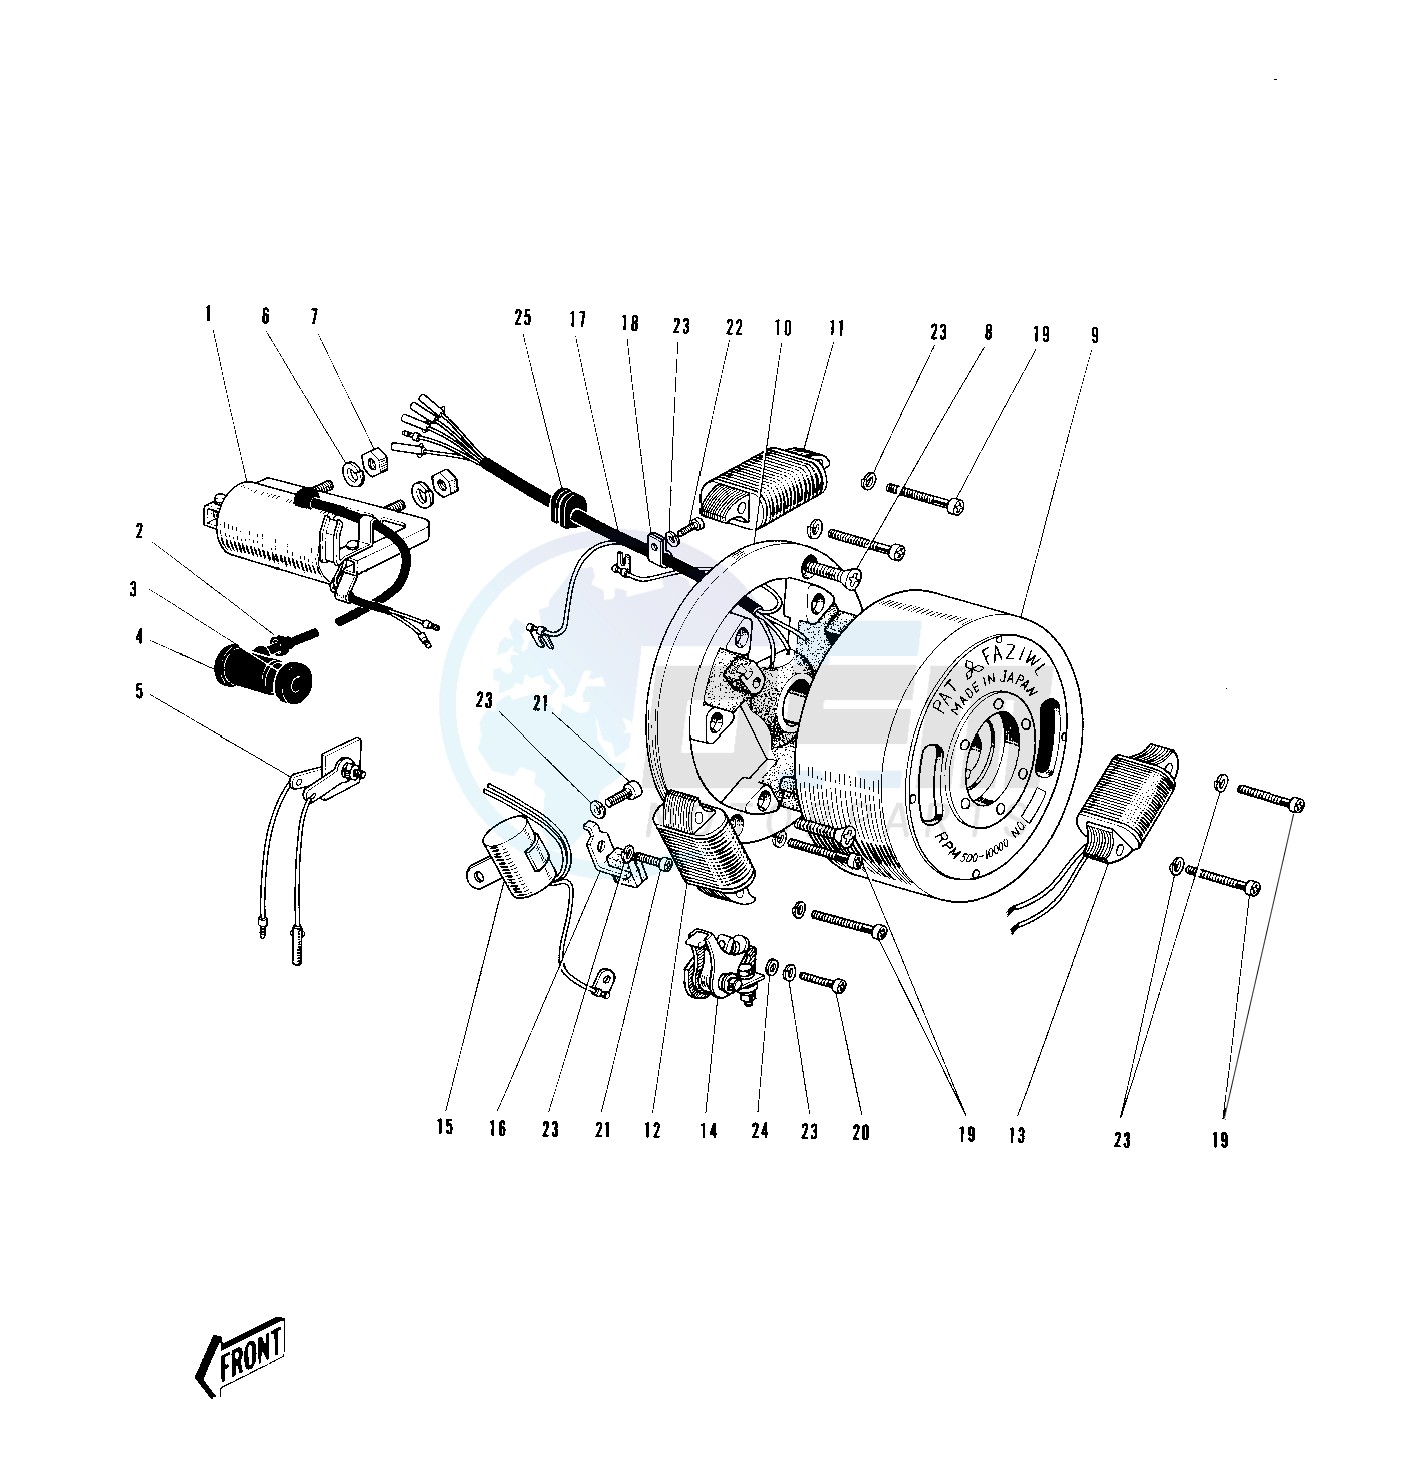 IGNITION_GENERATOR -- From E_NO. 909150- - blueprint